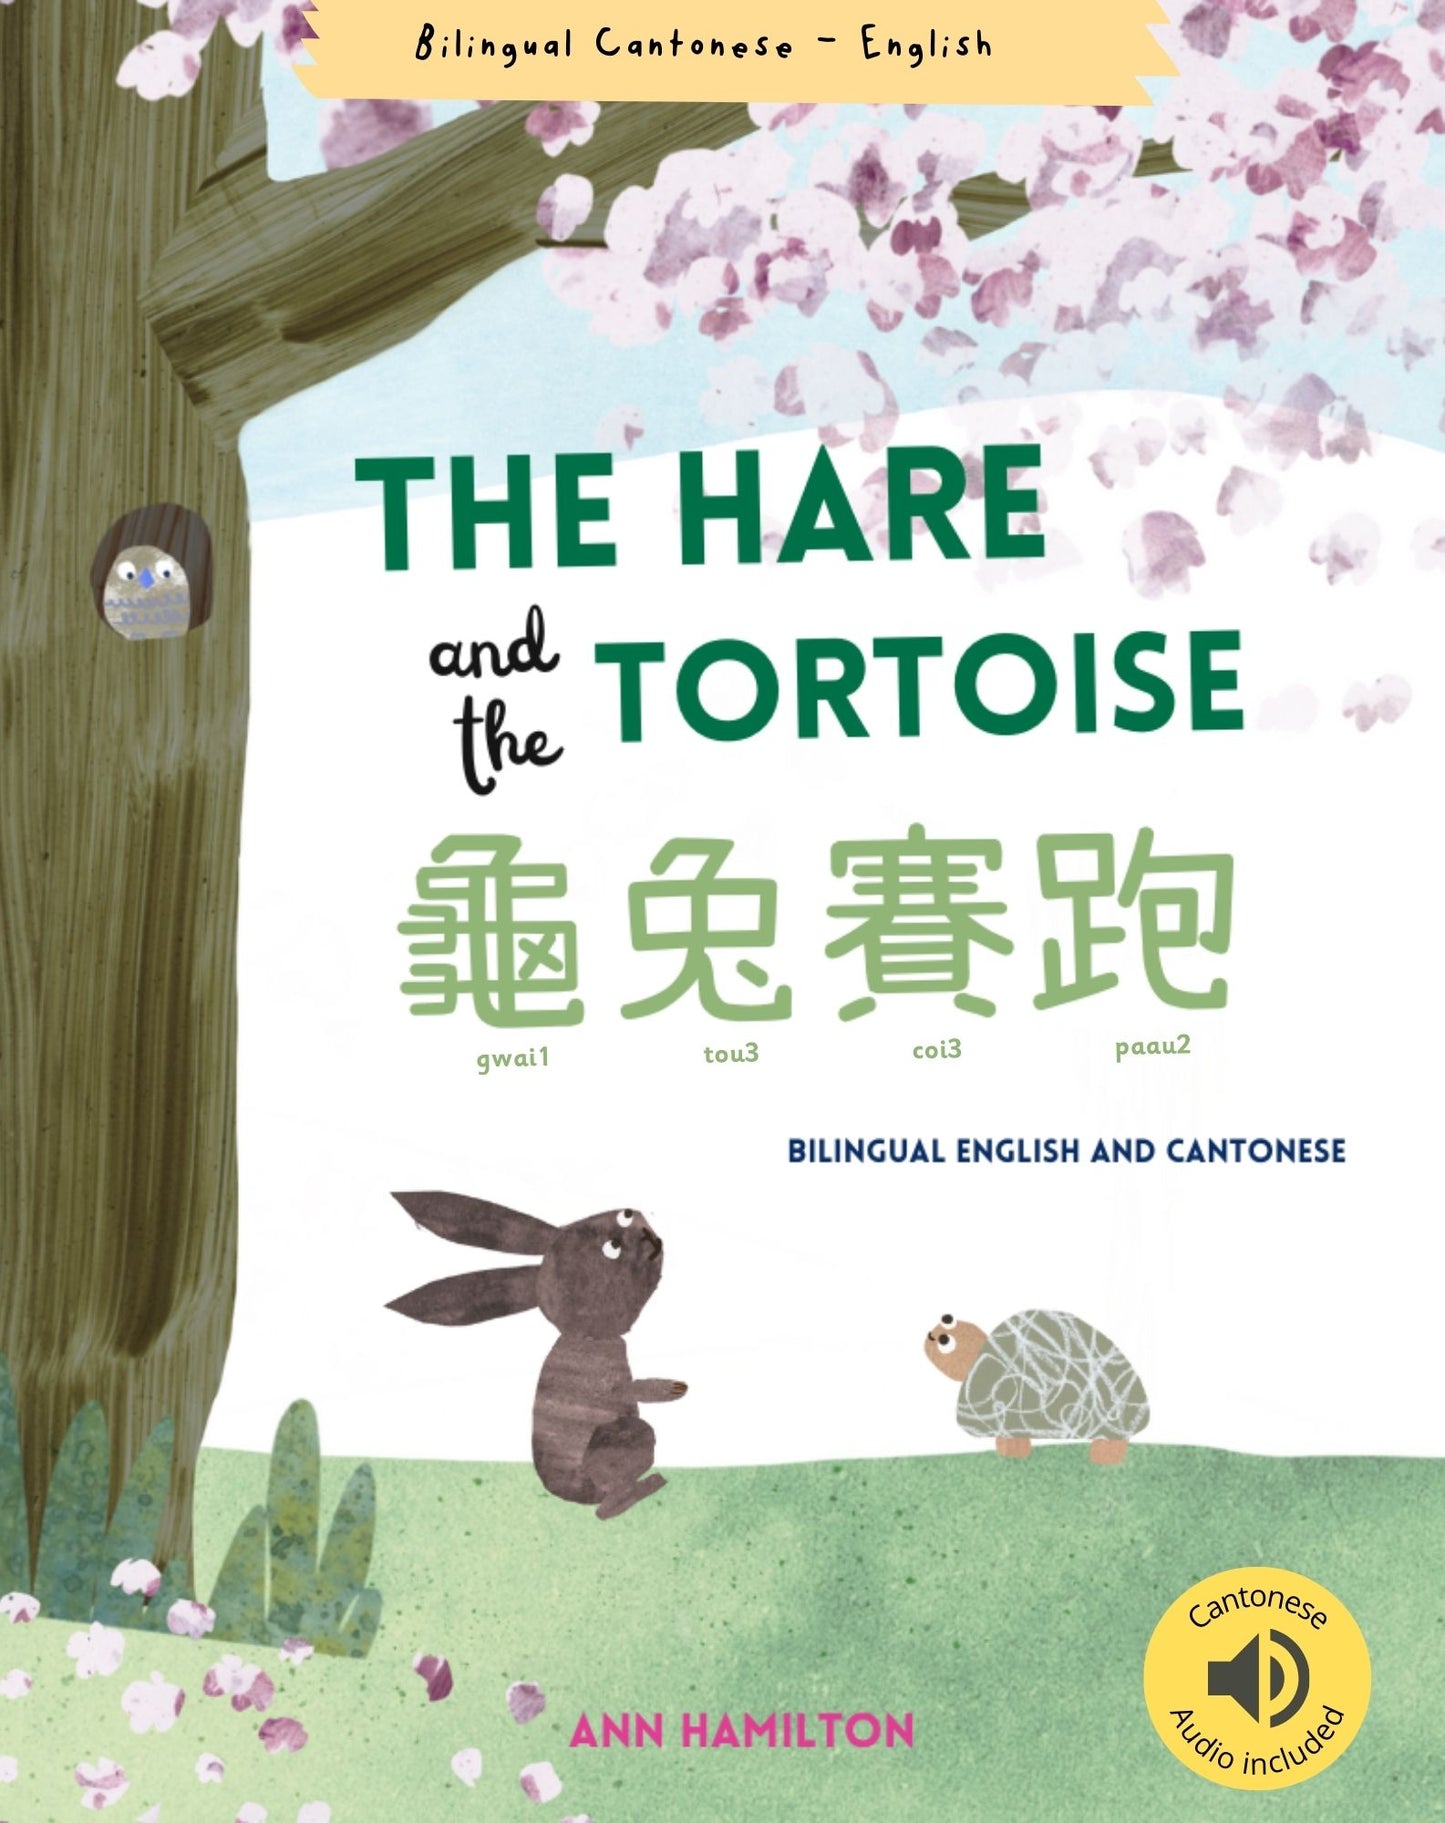 The Hare and The Tortoise 龜兔賽跑 (Bilingual Cantonese with Jyutping and English - Traditional Chinese Version) Audio included